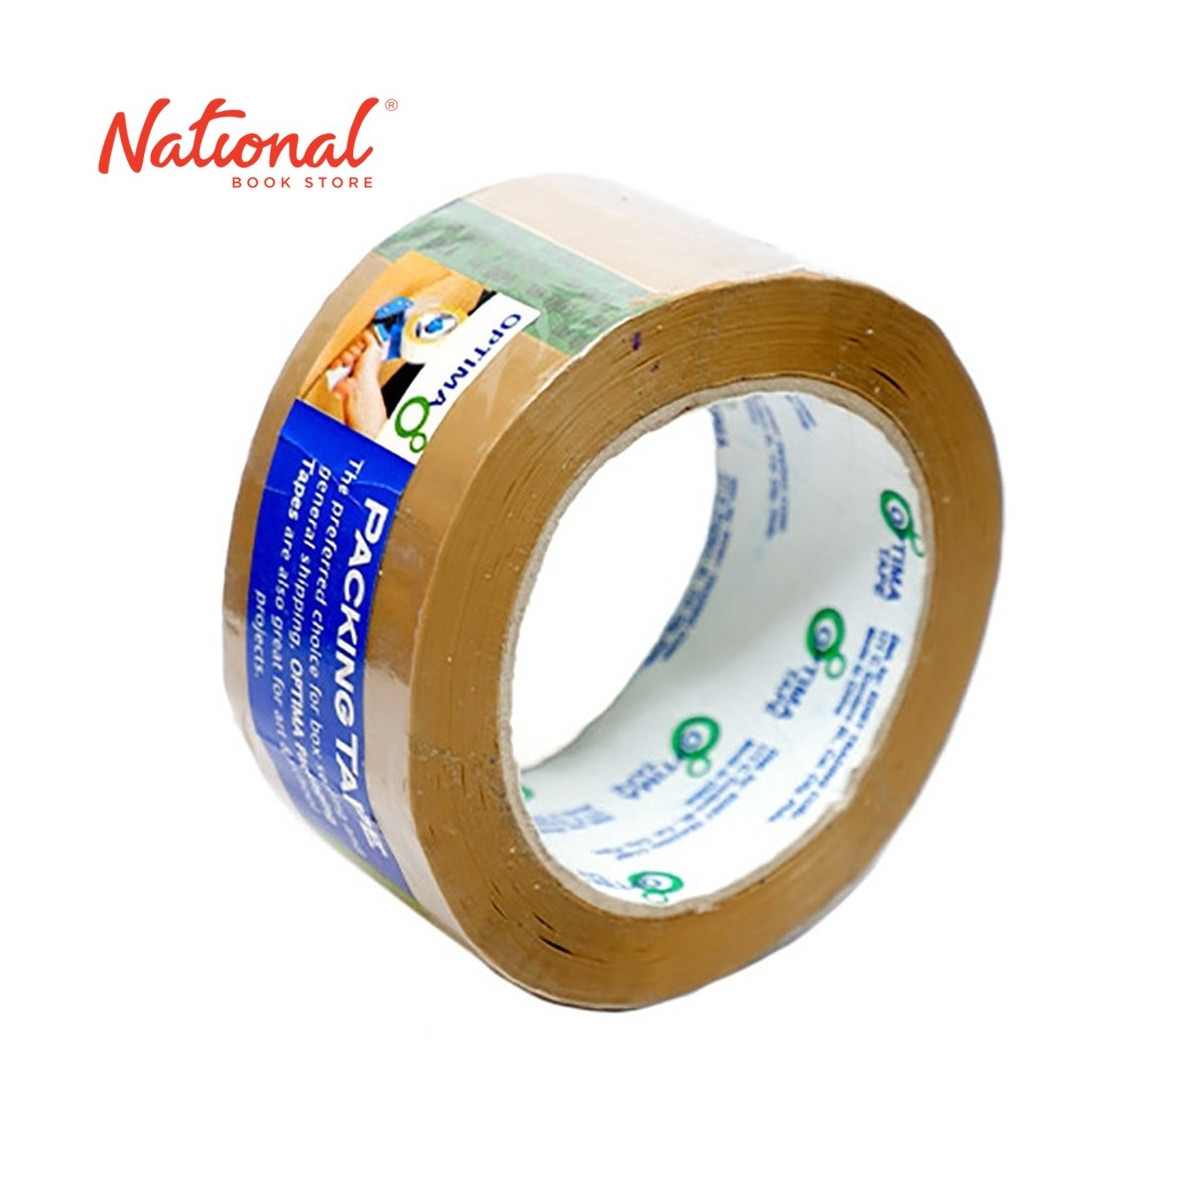 OPTIMA PACKAGING TAPE 48MMX100M TAN WITH PLASTIC PACKAGING